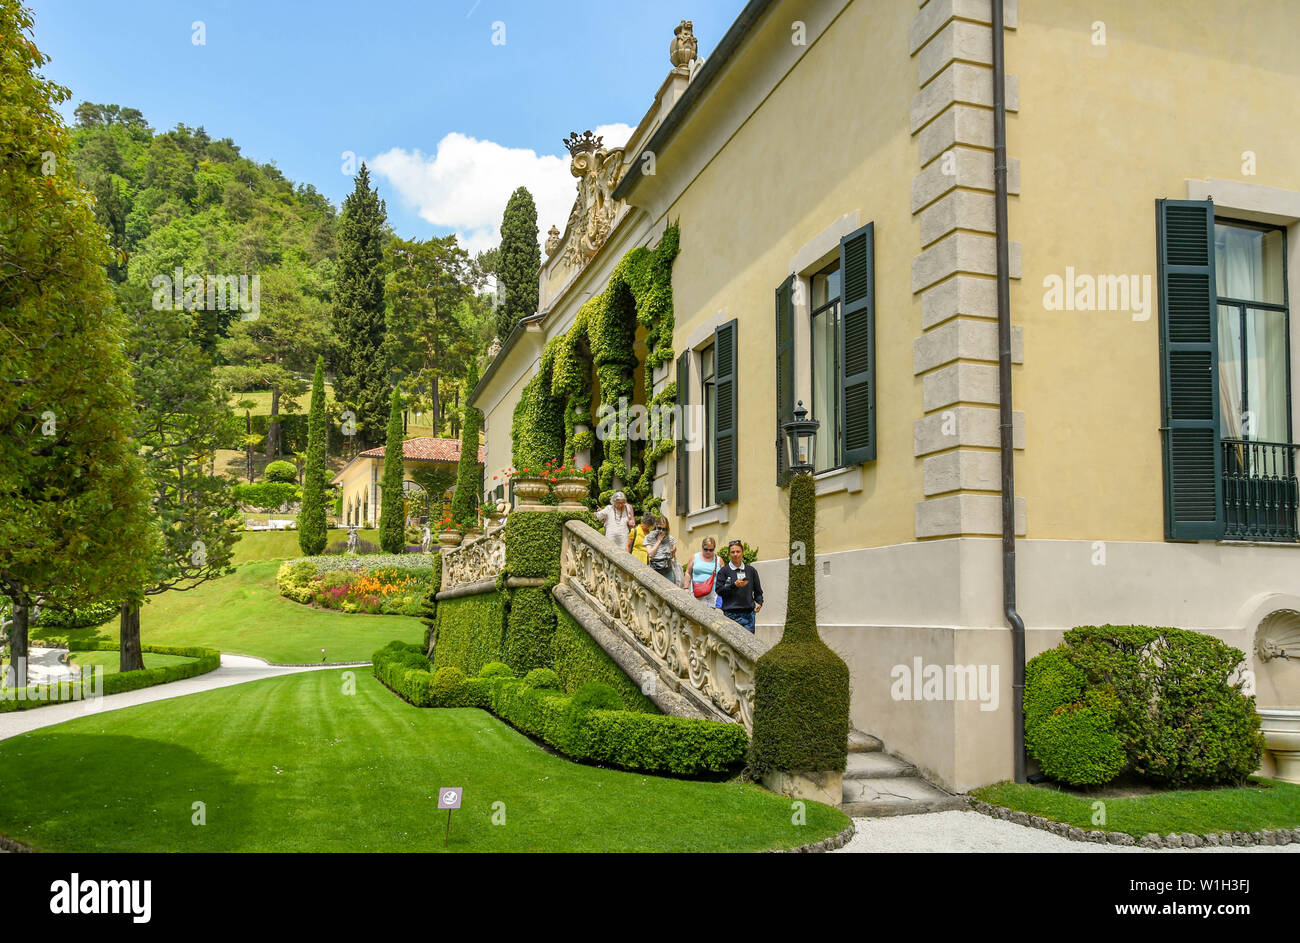 LENNO, LAKE COMO, ITALY - JUNE 2019: People in a guided tour party walking down steps from the lodge in the grounds of the Villa Balbianello in Lenno Stock Photo